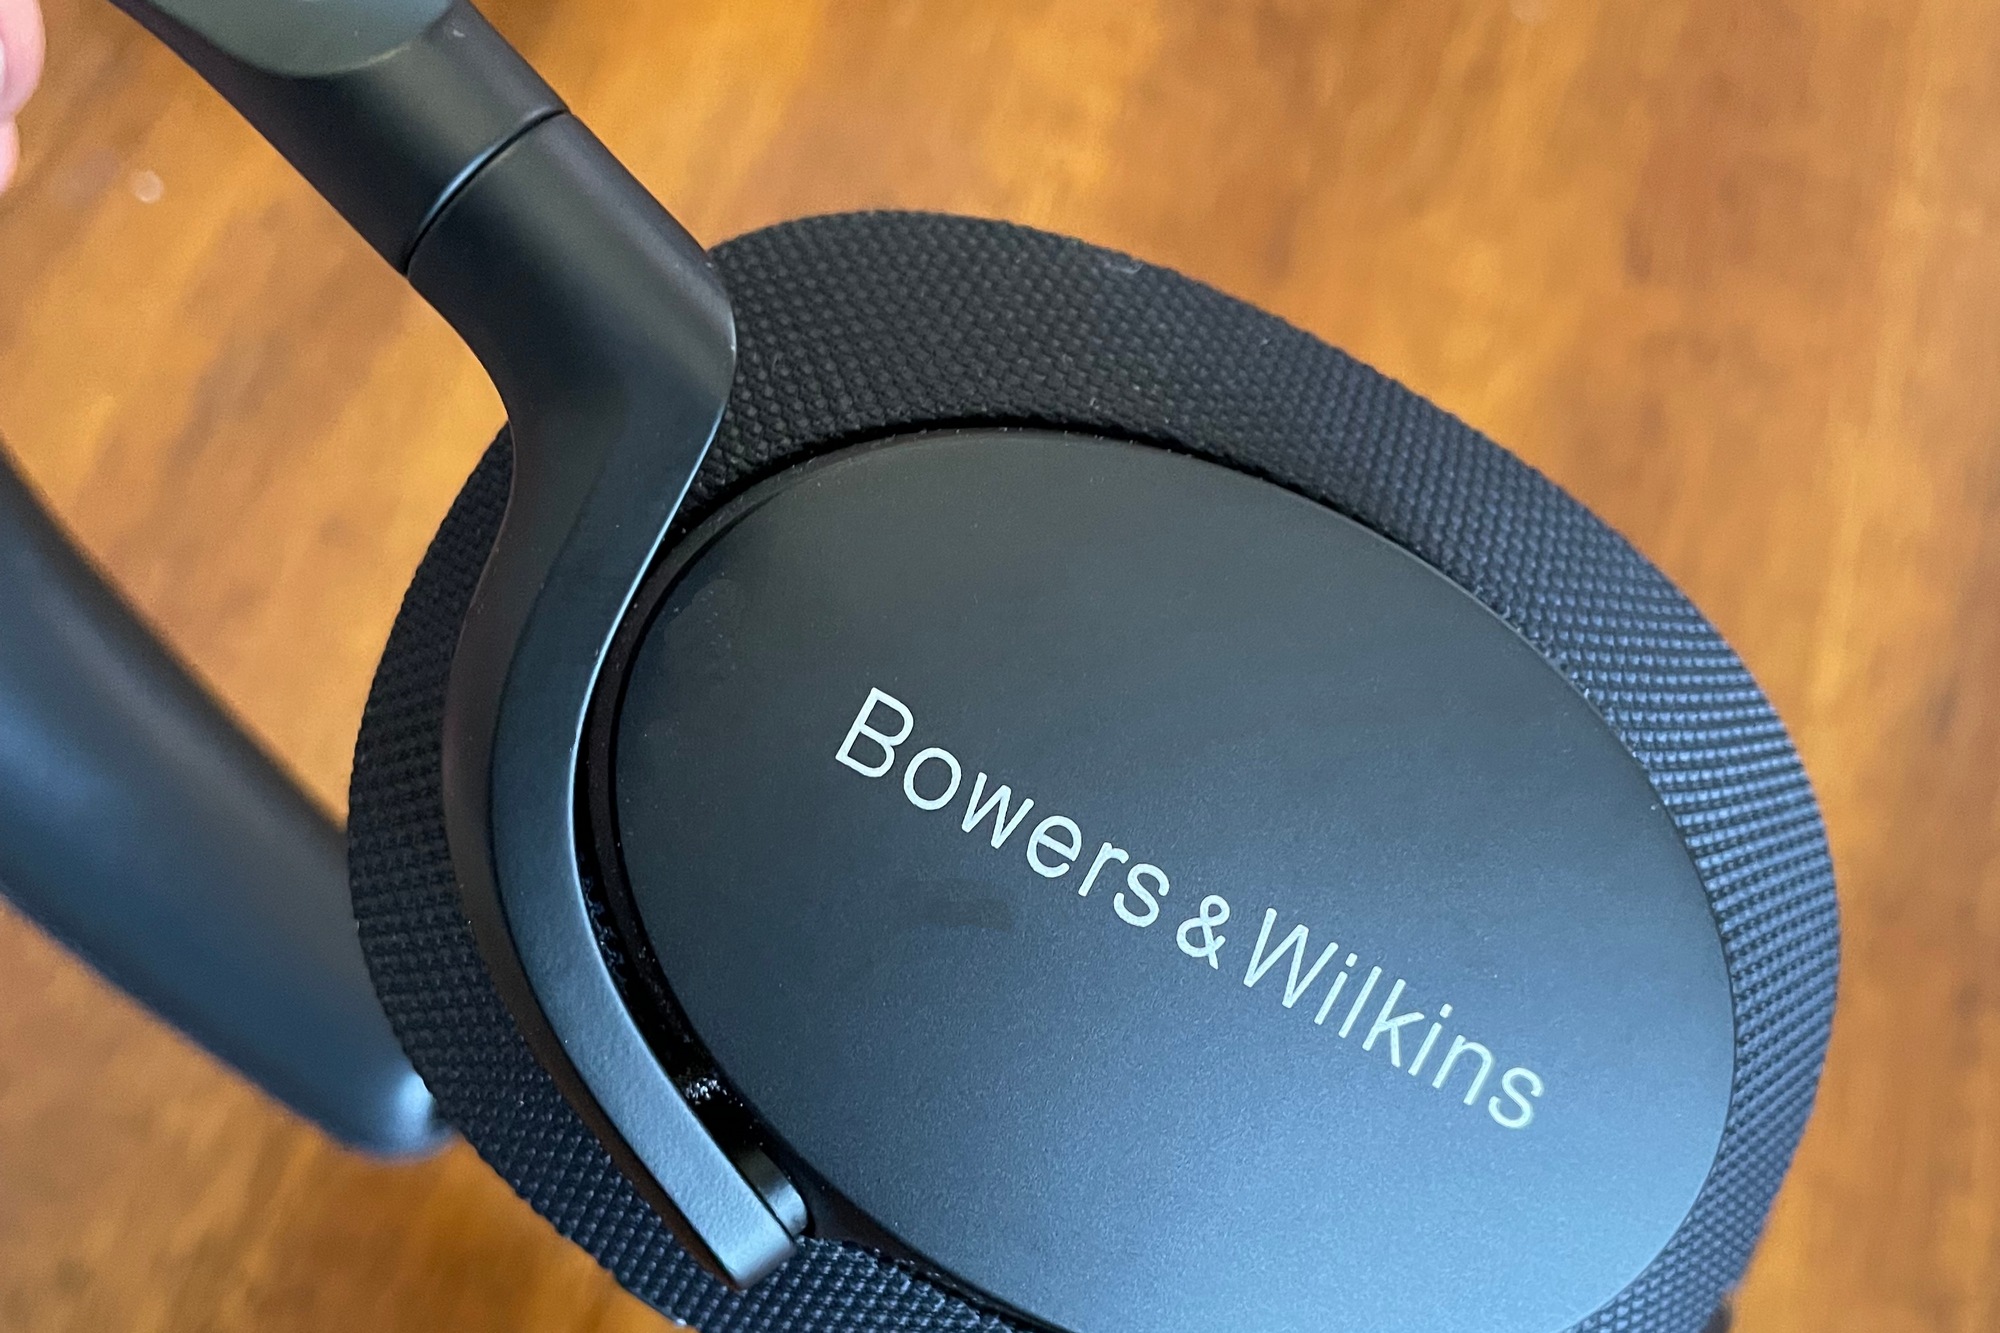 Bowers & Wilkins Px7 S2 review: Less sizzle, more steak | TechHive